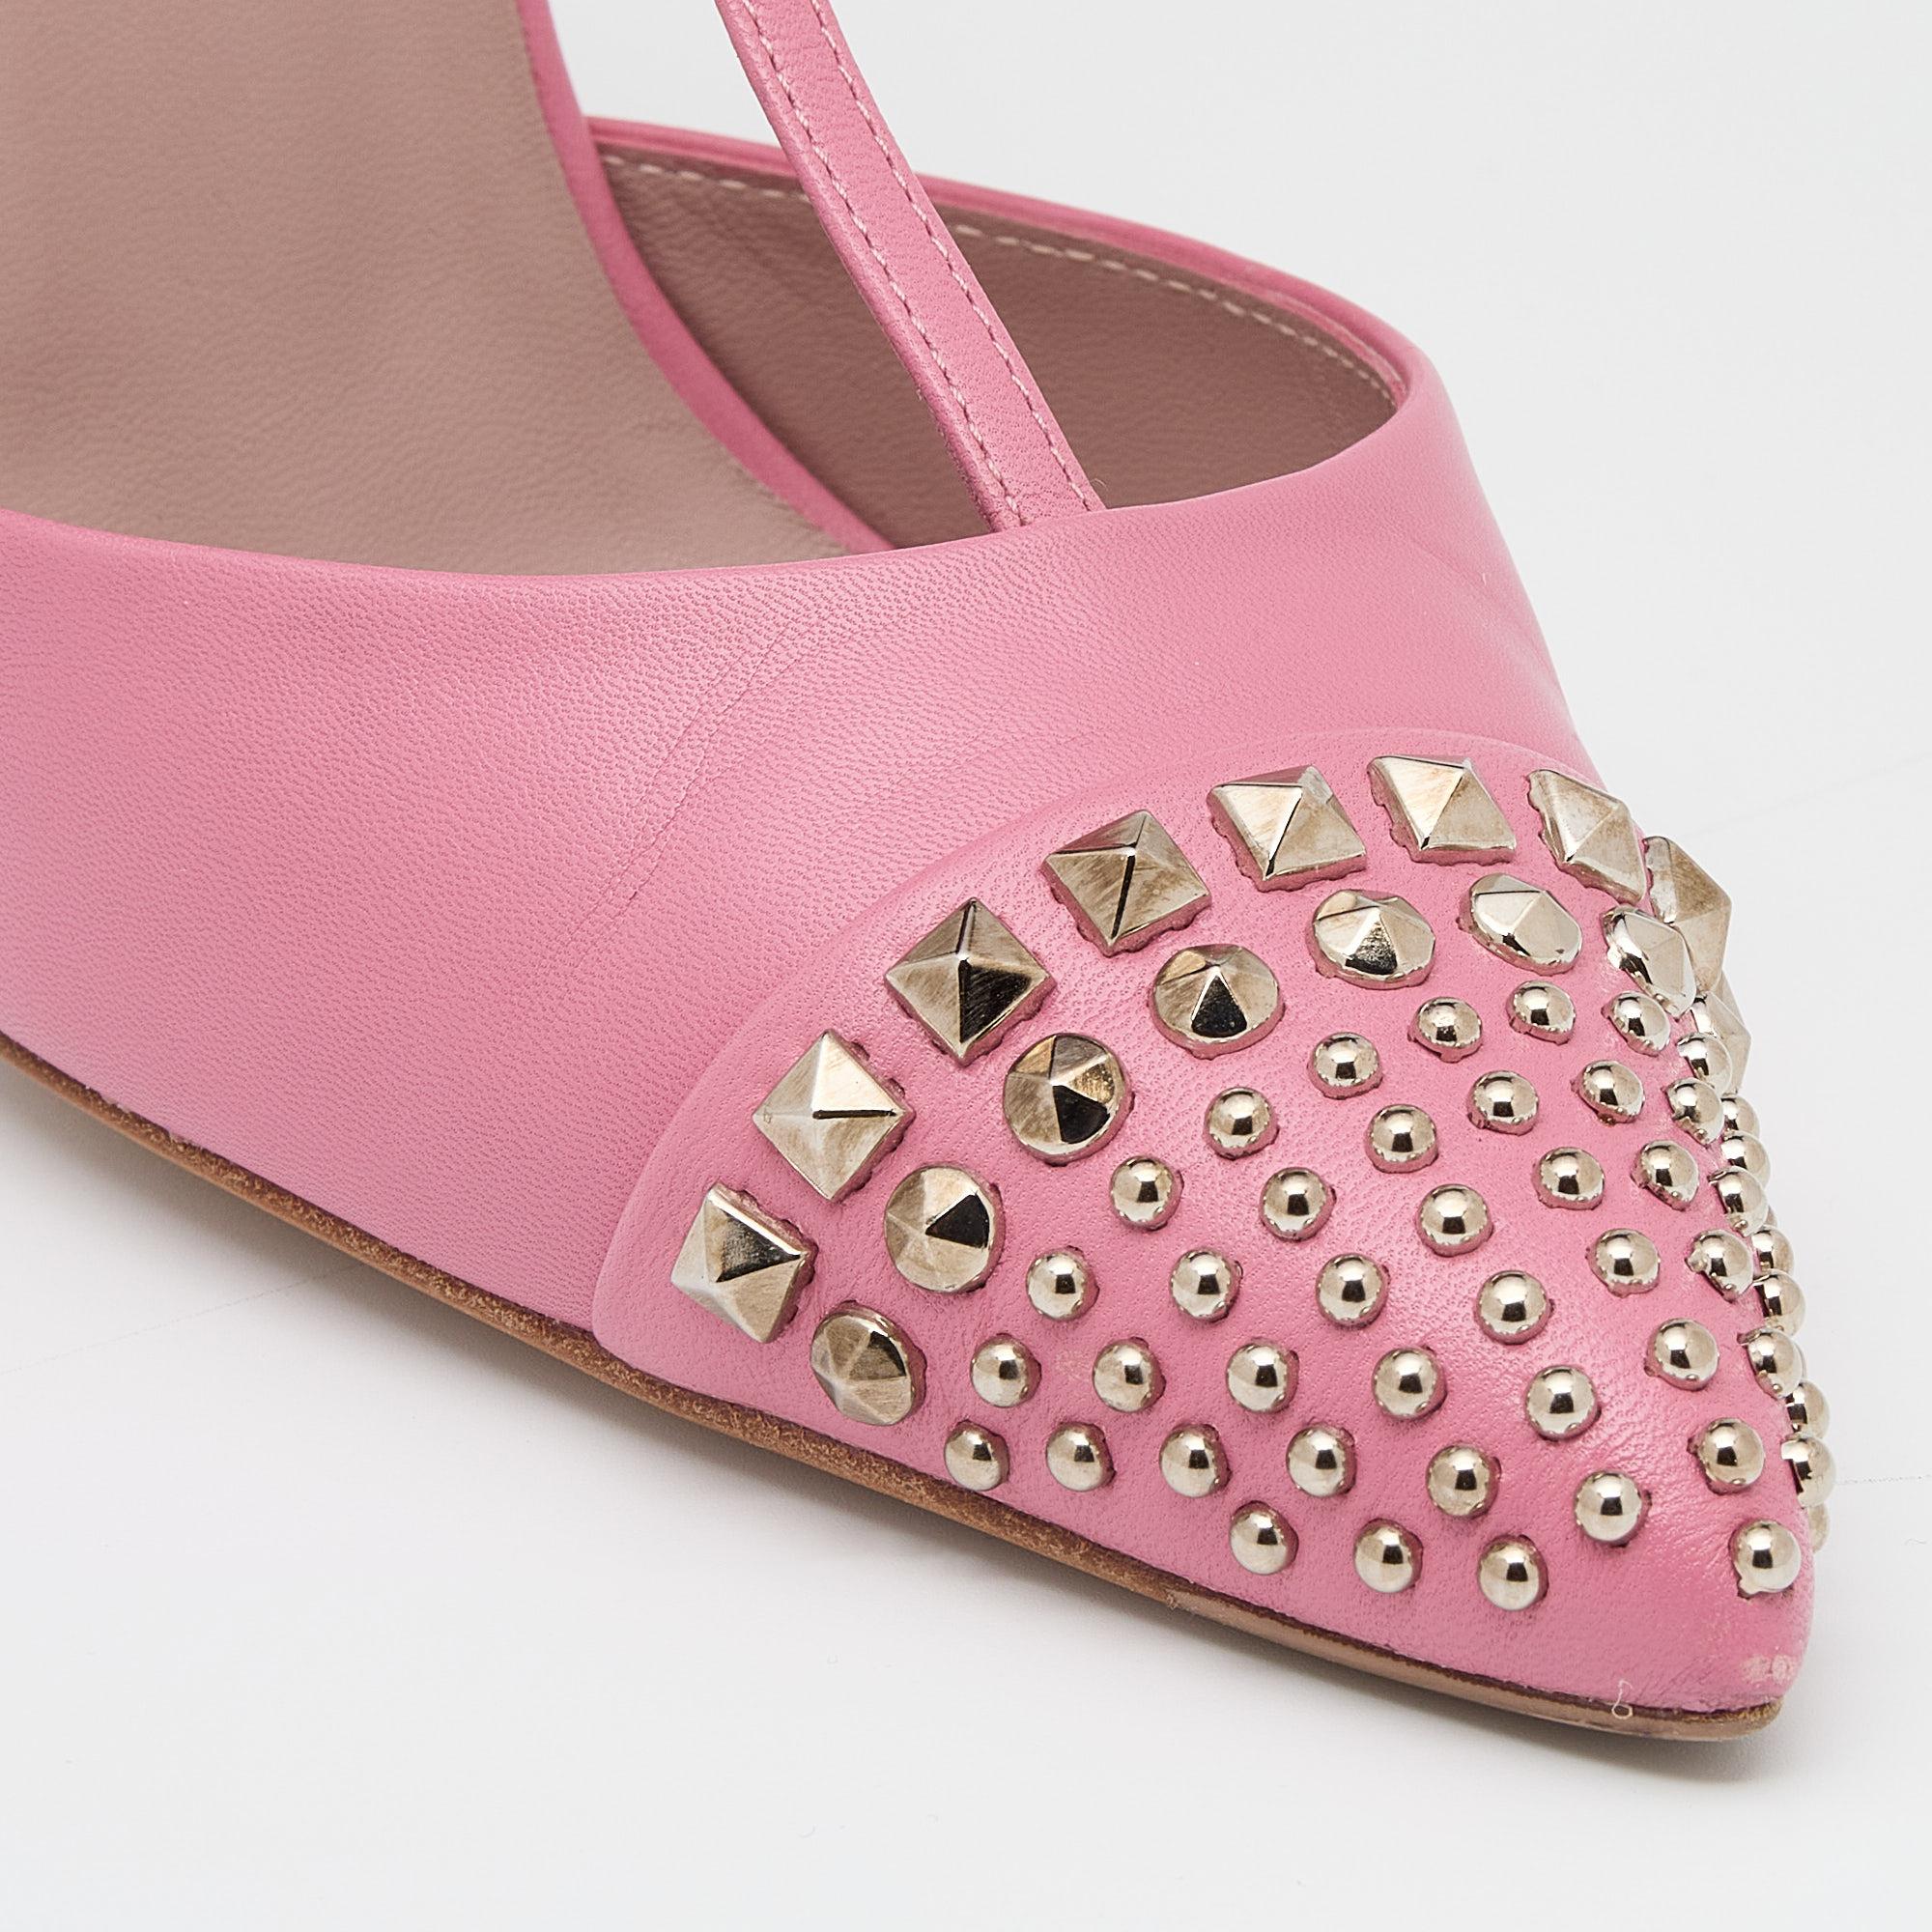 Women's Gucci Pink Leather Malaga Studded T Strap Pumps Size 38.5